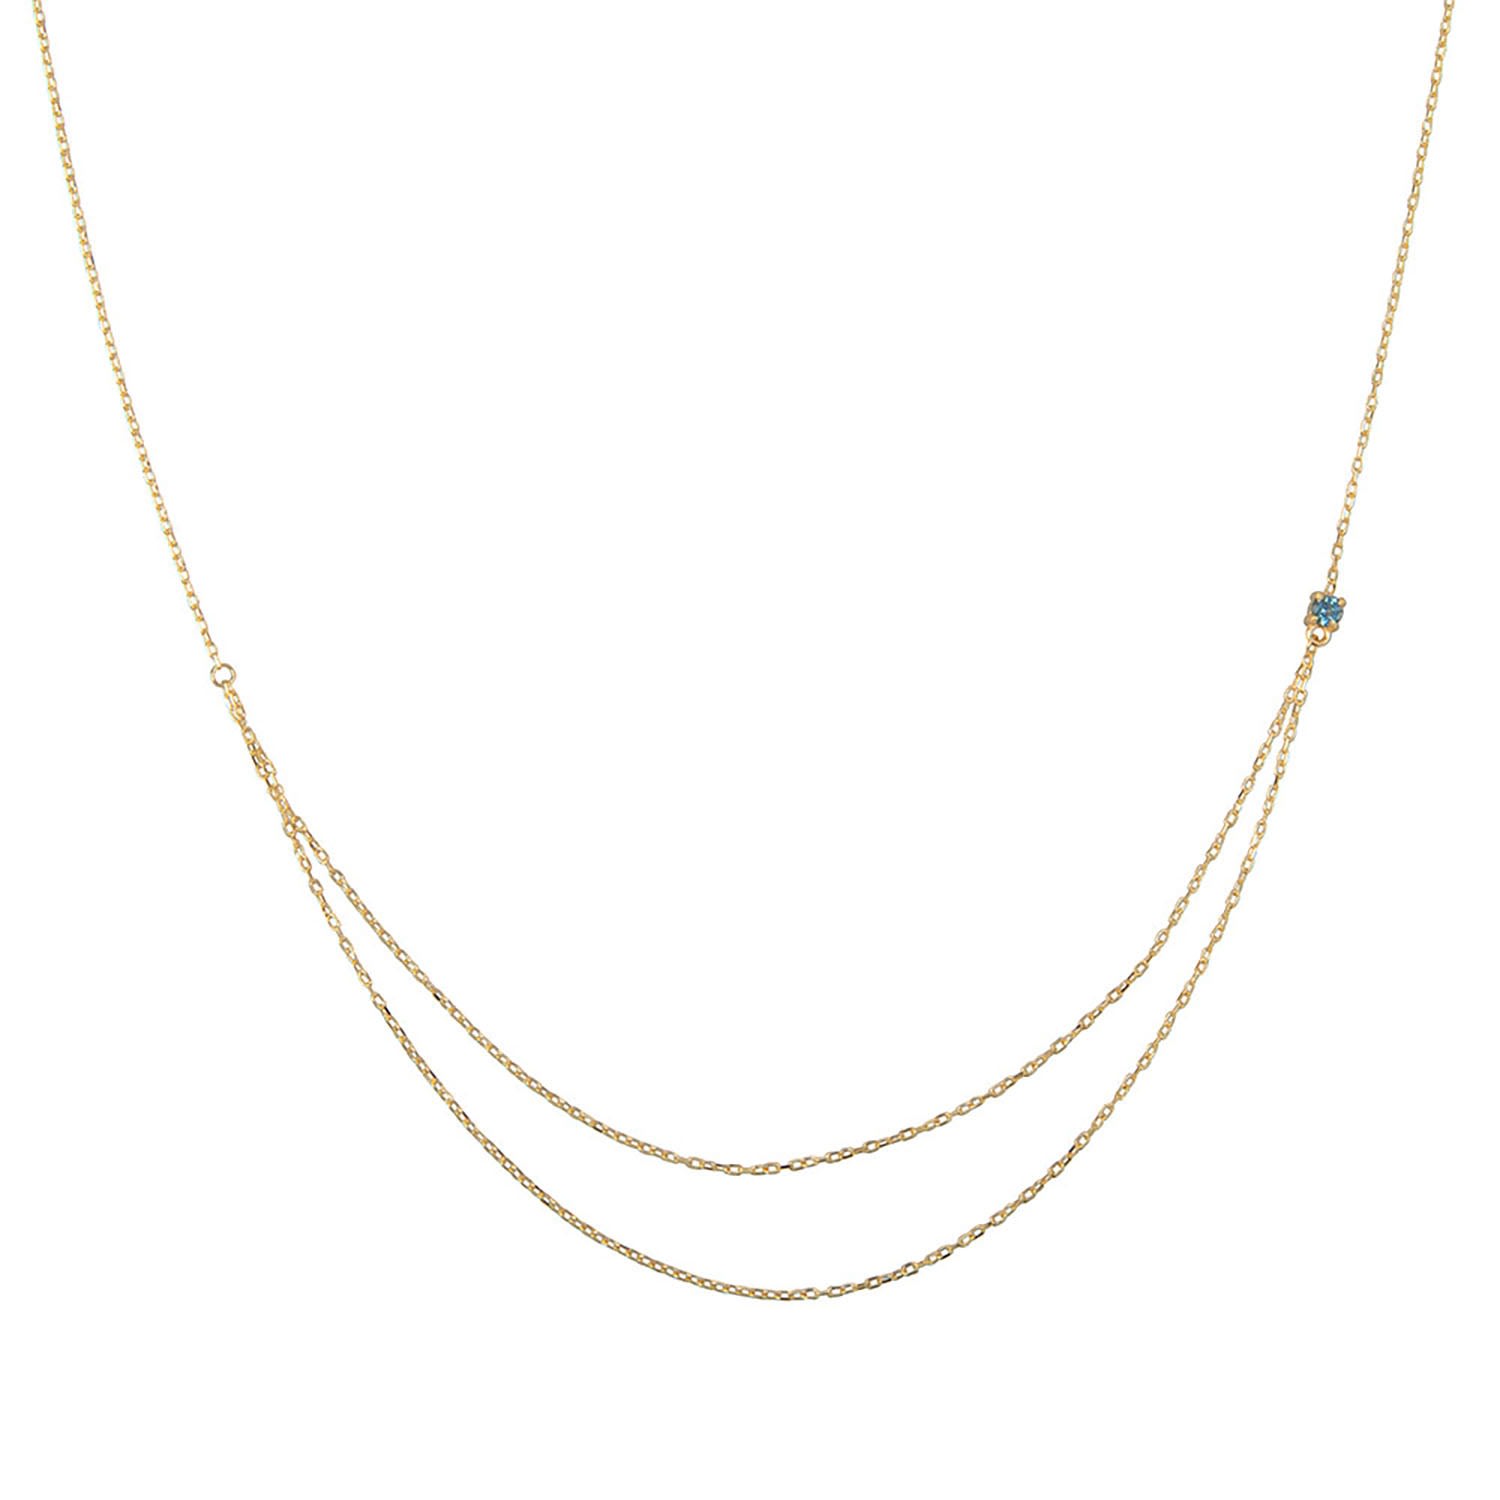 Ana Dyla Women's Elodie London Topaz Necklace In Gold